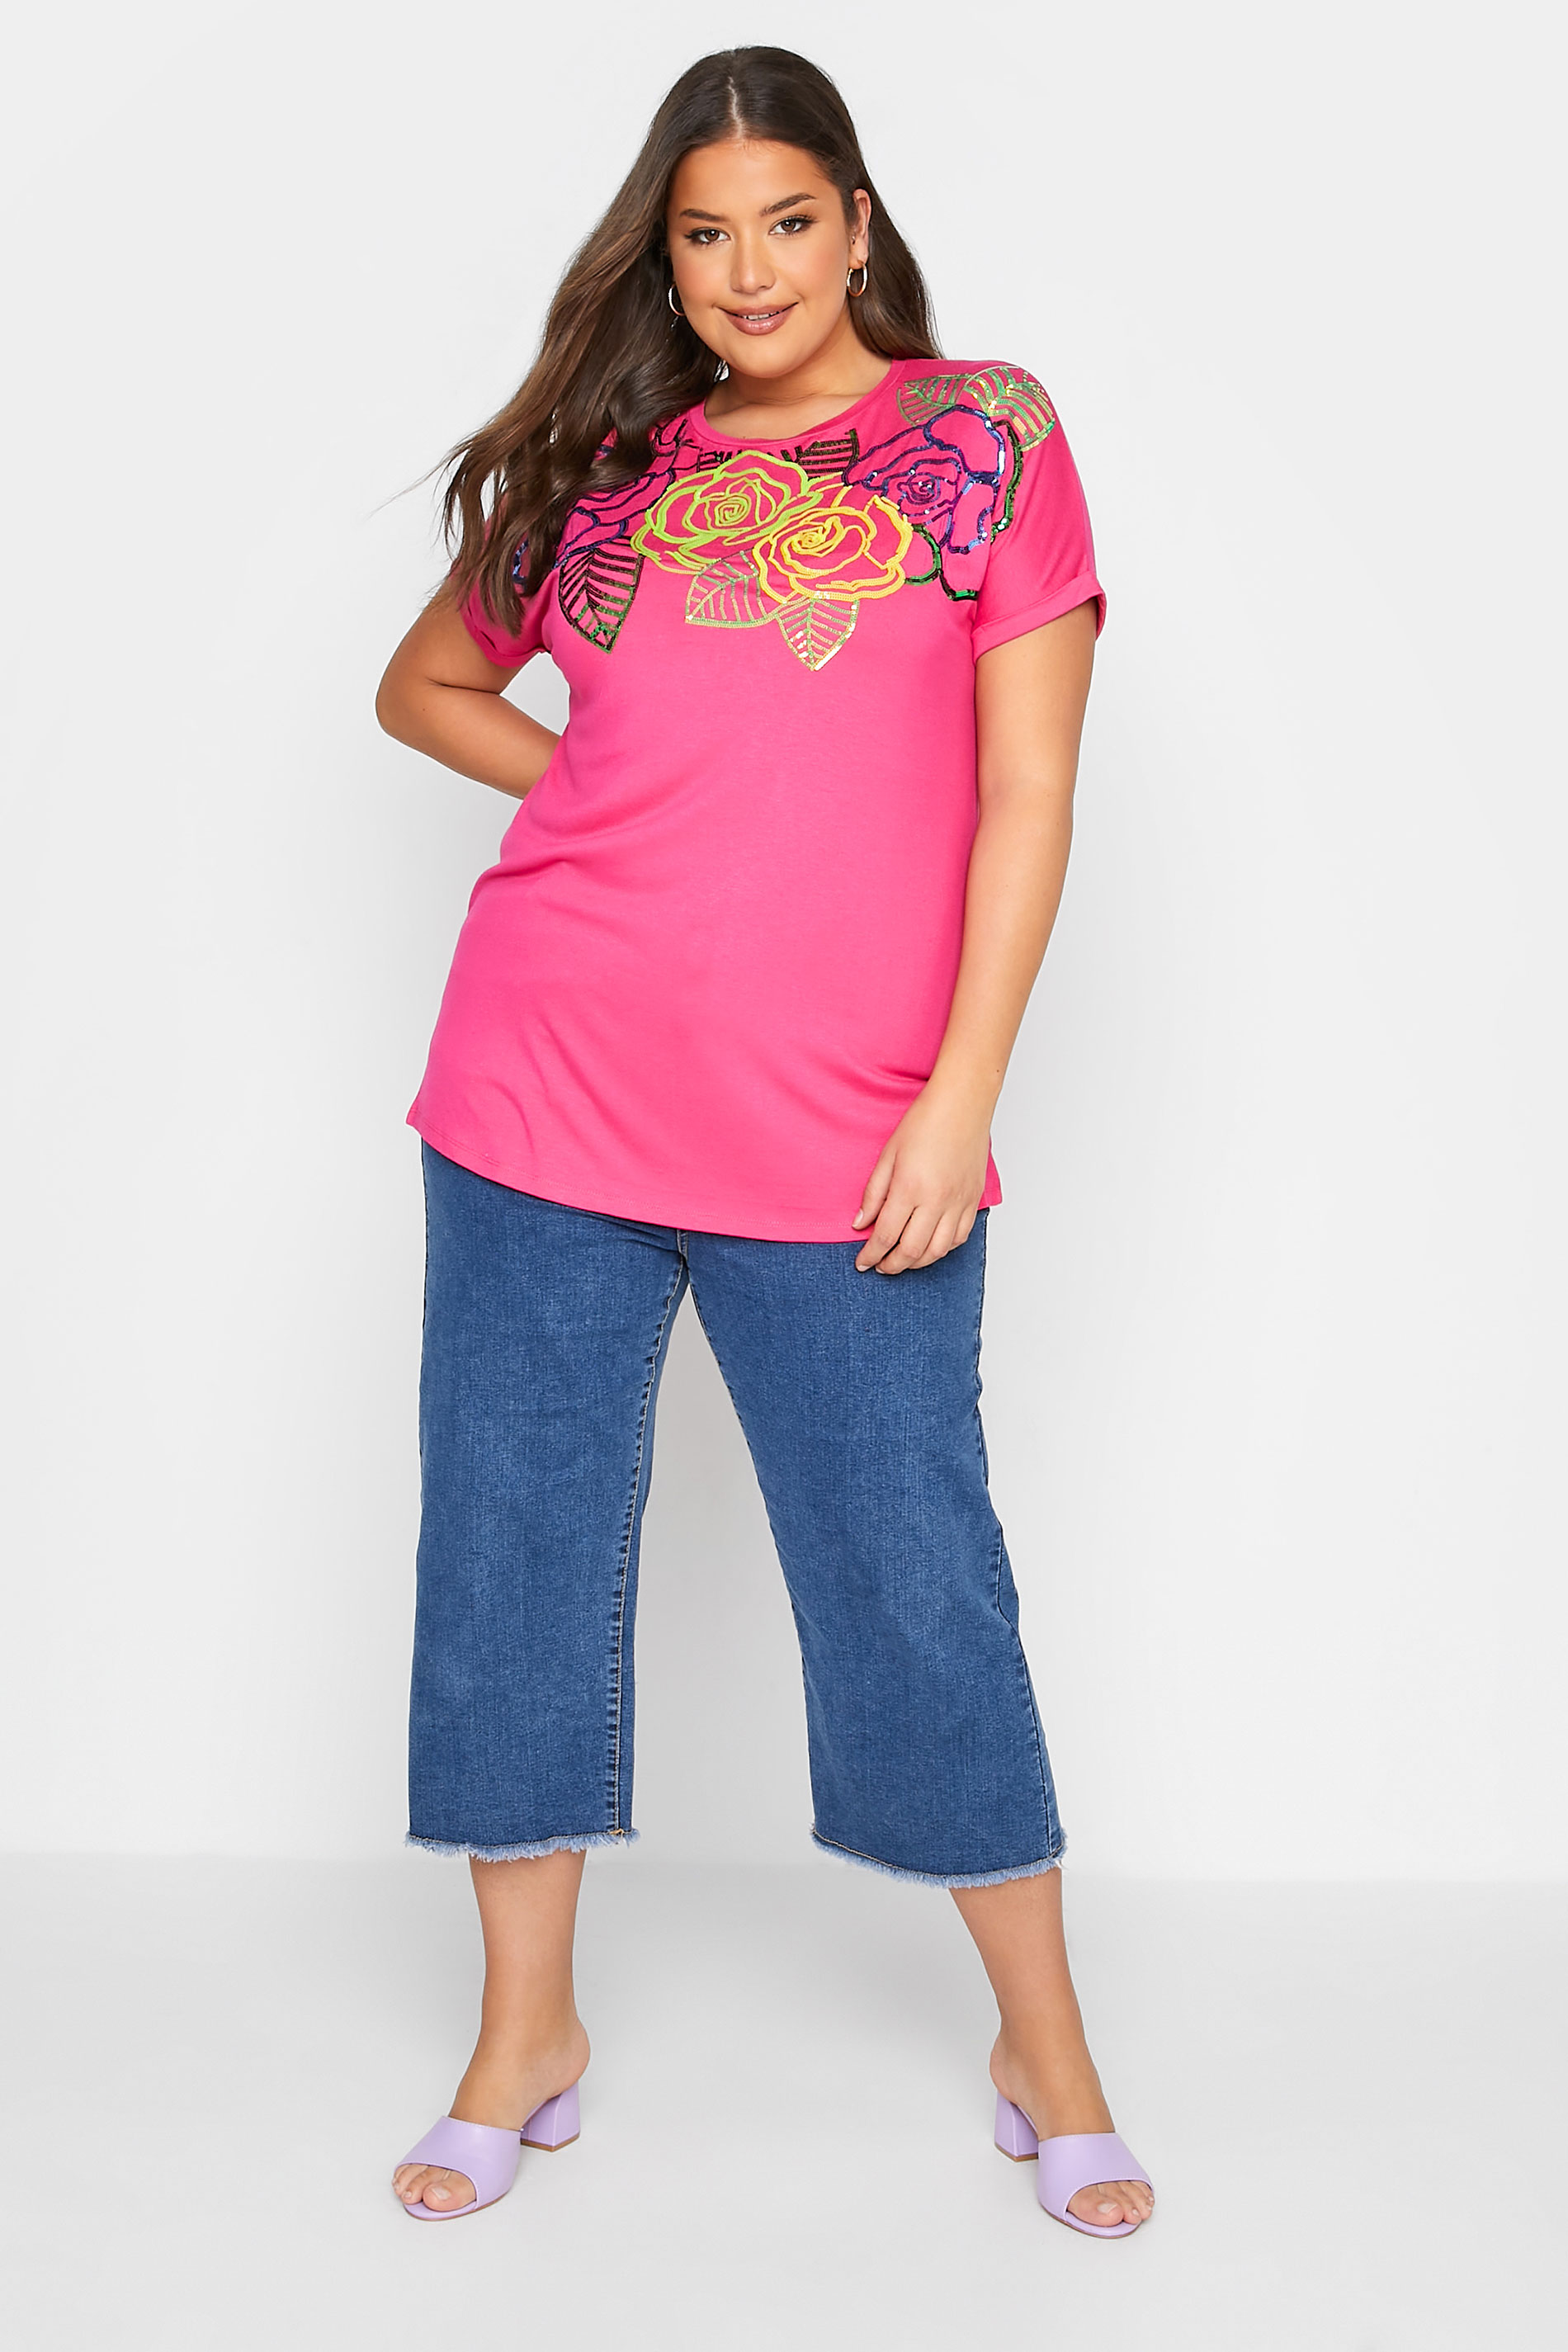 Grande taille  Tops Grande taille  T-Shirts | Curve Hot Pink Floral Embellished Sequin T-Shirt - WX55869